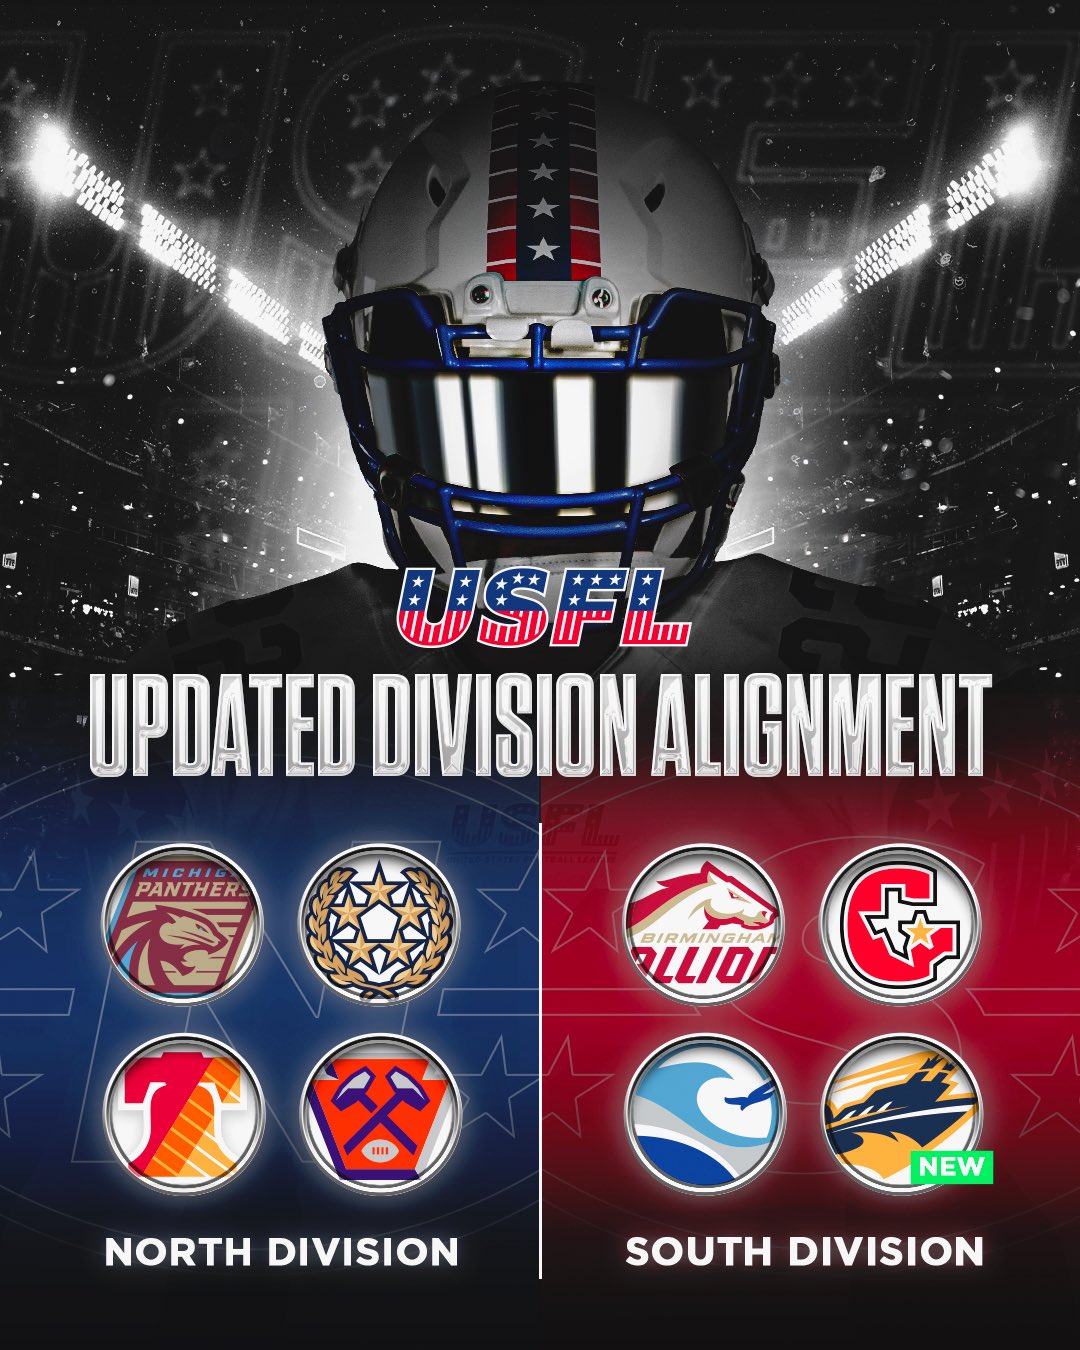 USFL on Twitter "Here’s a look at the updated division alignment for